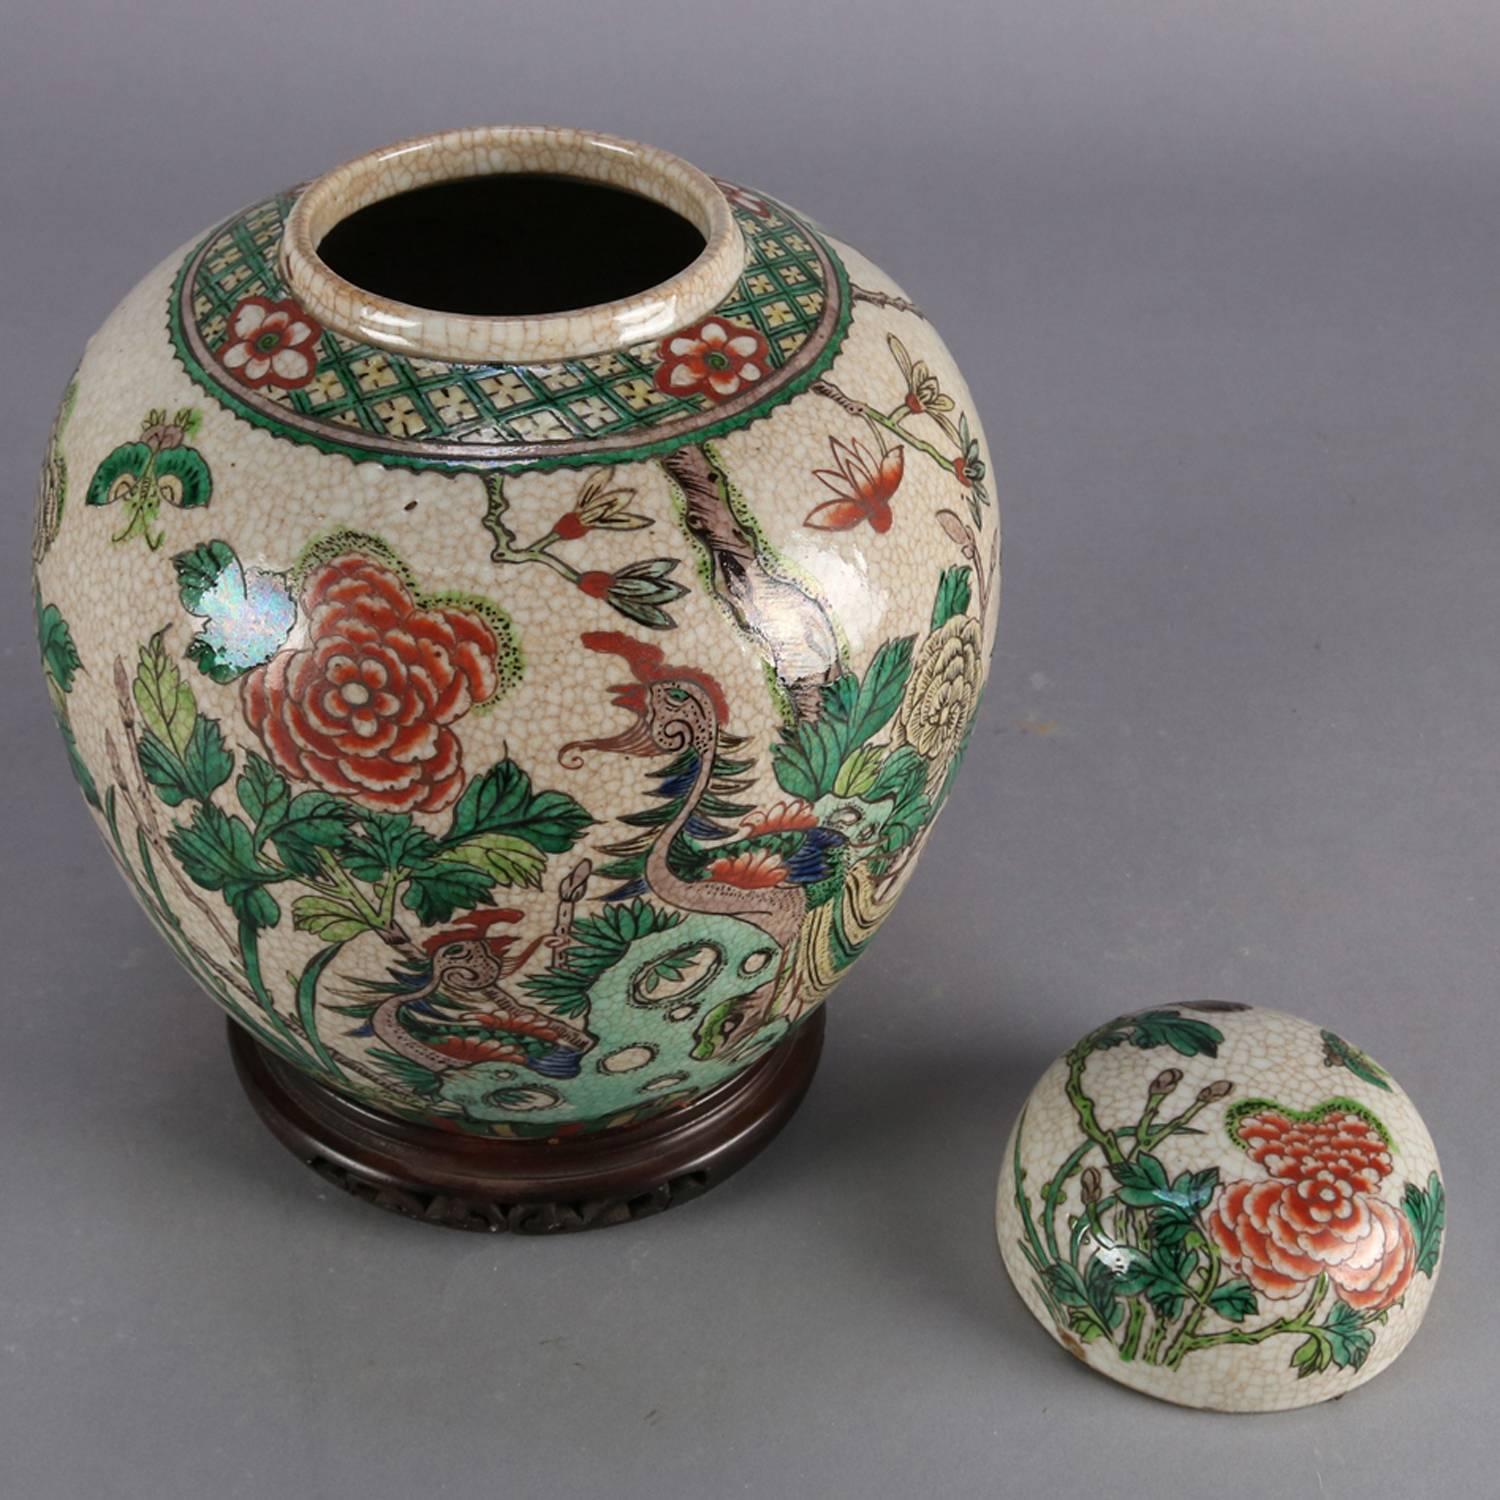 Antique hand-painted Chinese porcelain ginger jar with garden and pond motif, signed on base, seated on carved and pierced rosewood stand, 19th century

Measures: 12.5